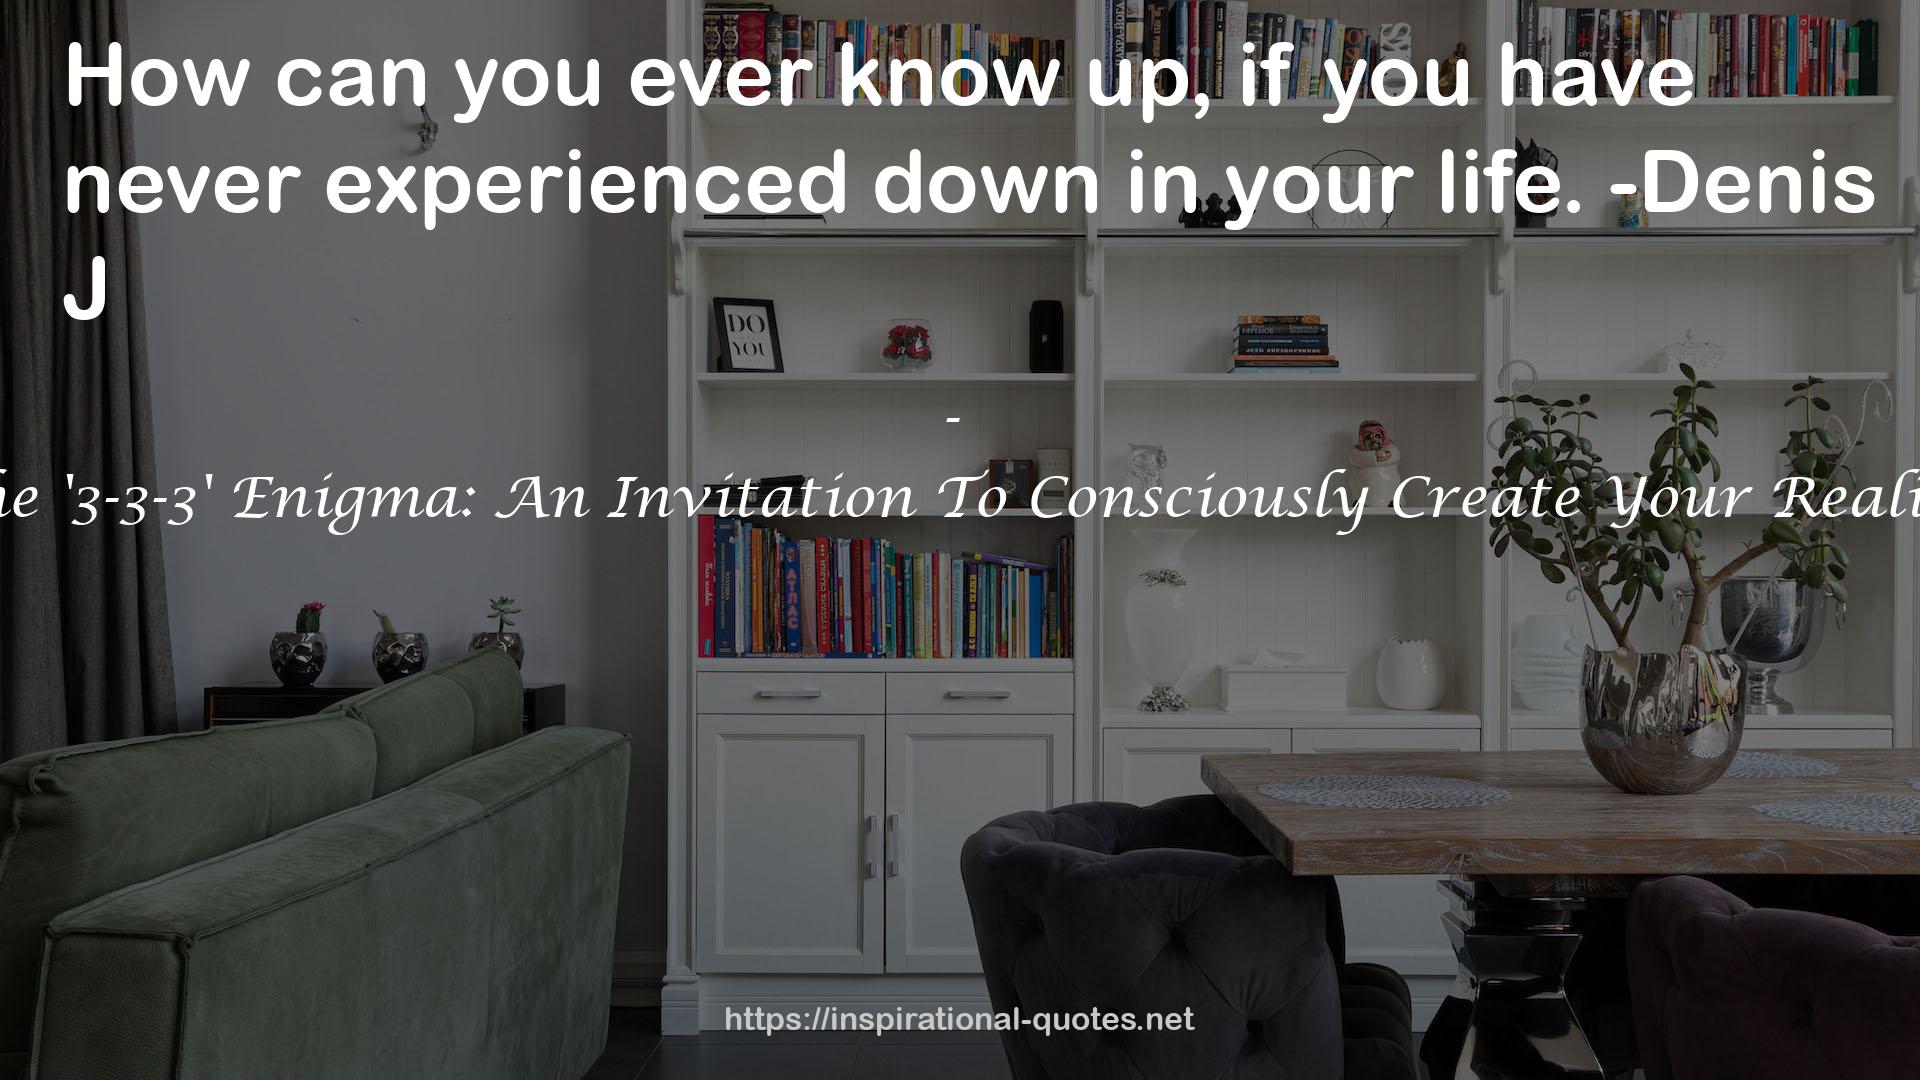 The '3-3-3' Enigma: An Invitation To Consciously Create Your Reality QUOTES